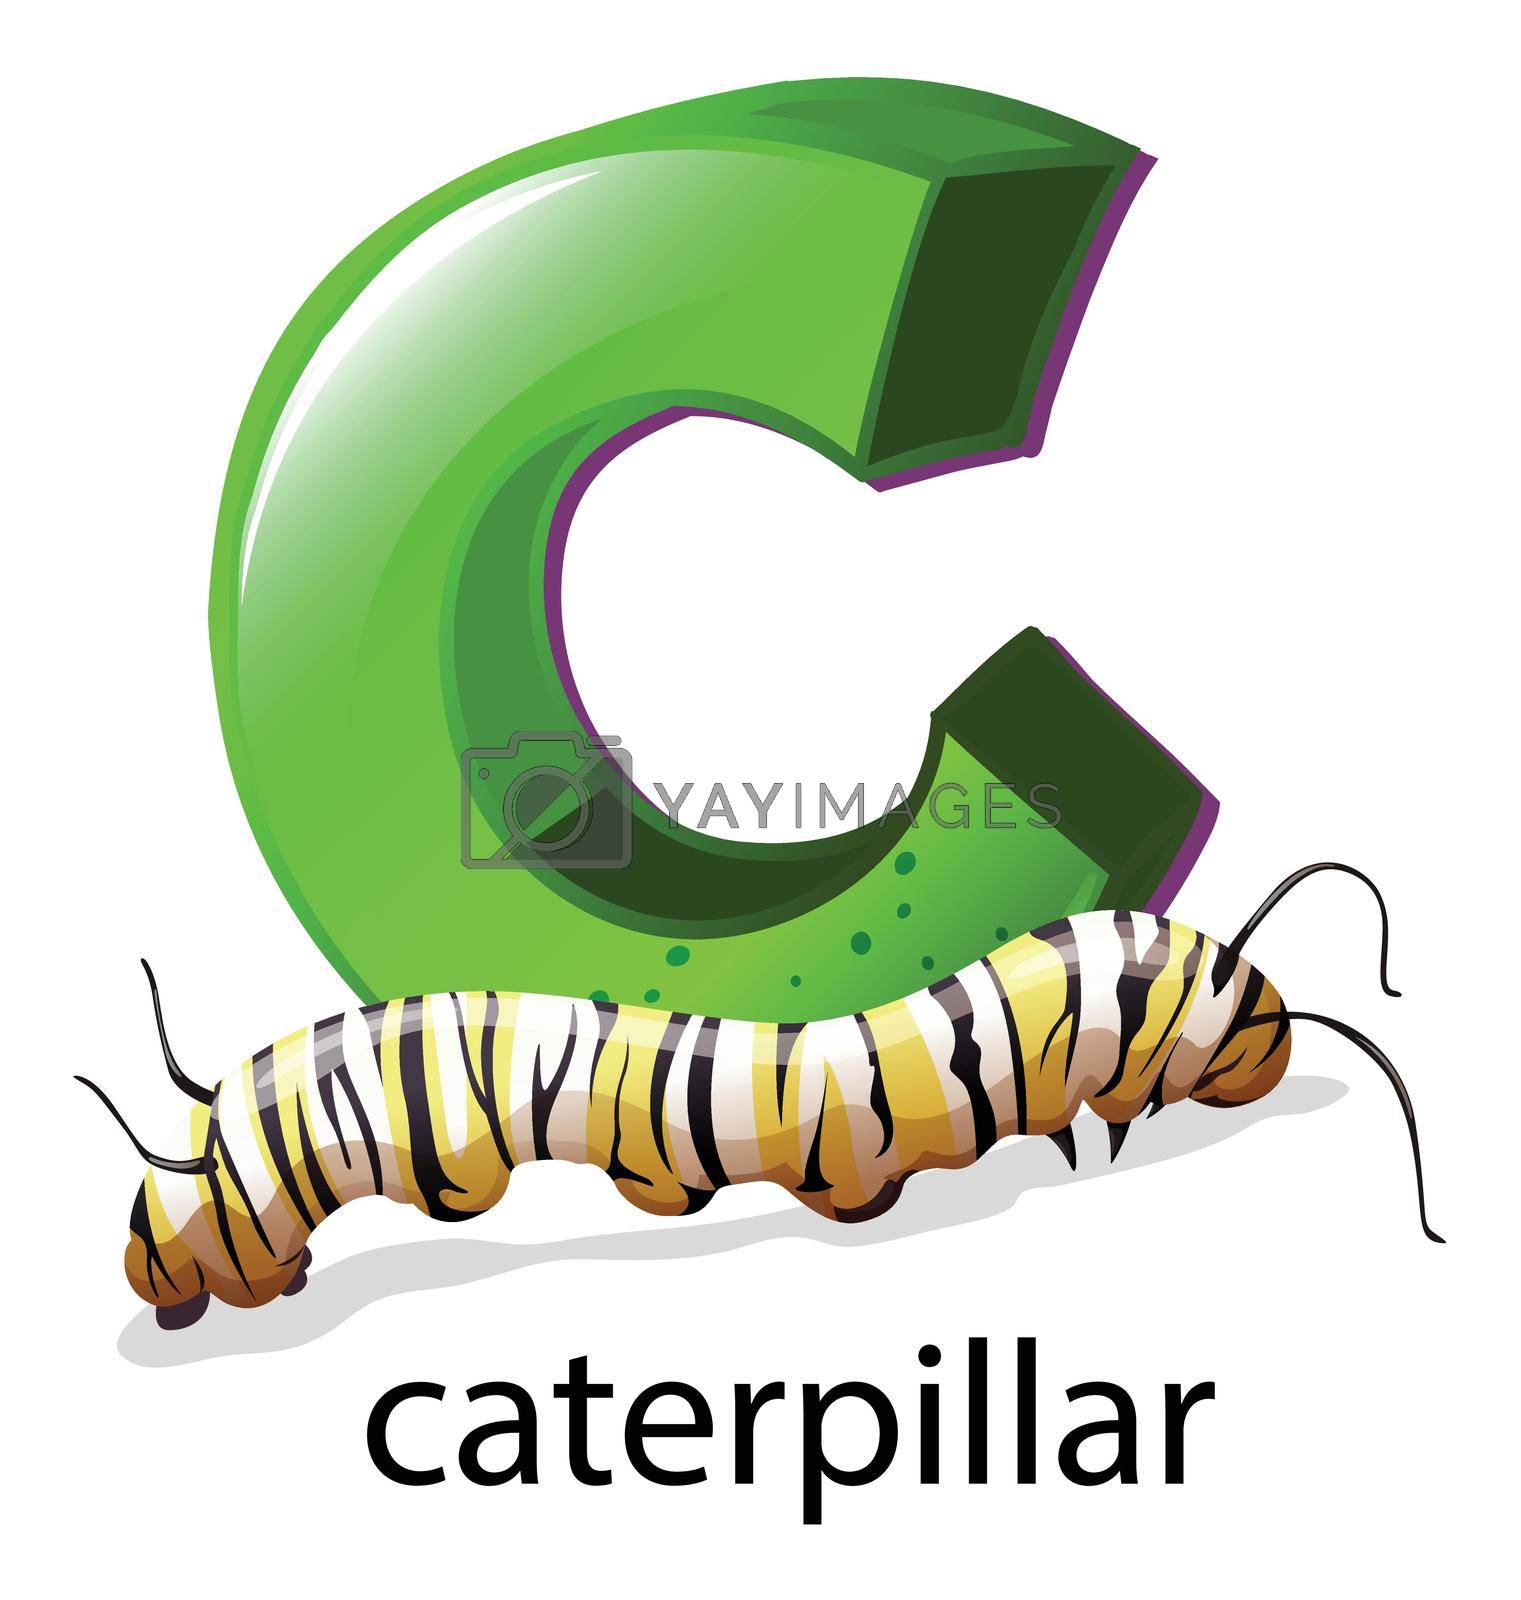 Royalty free image of A letter C for caterpillar by iimages